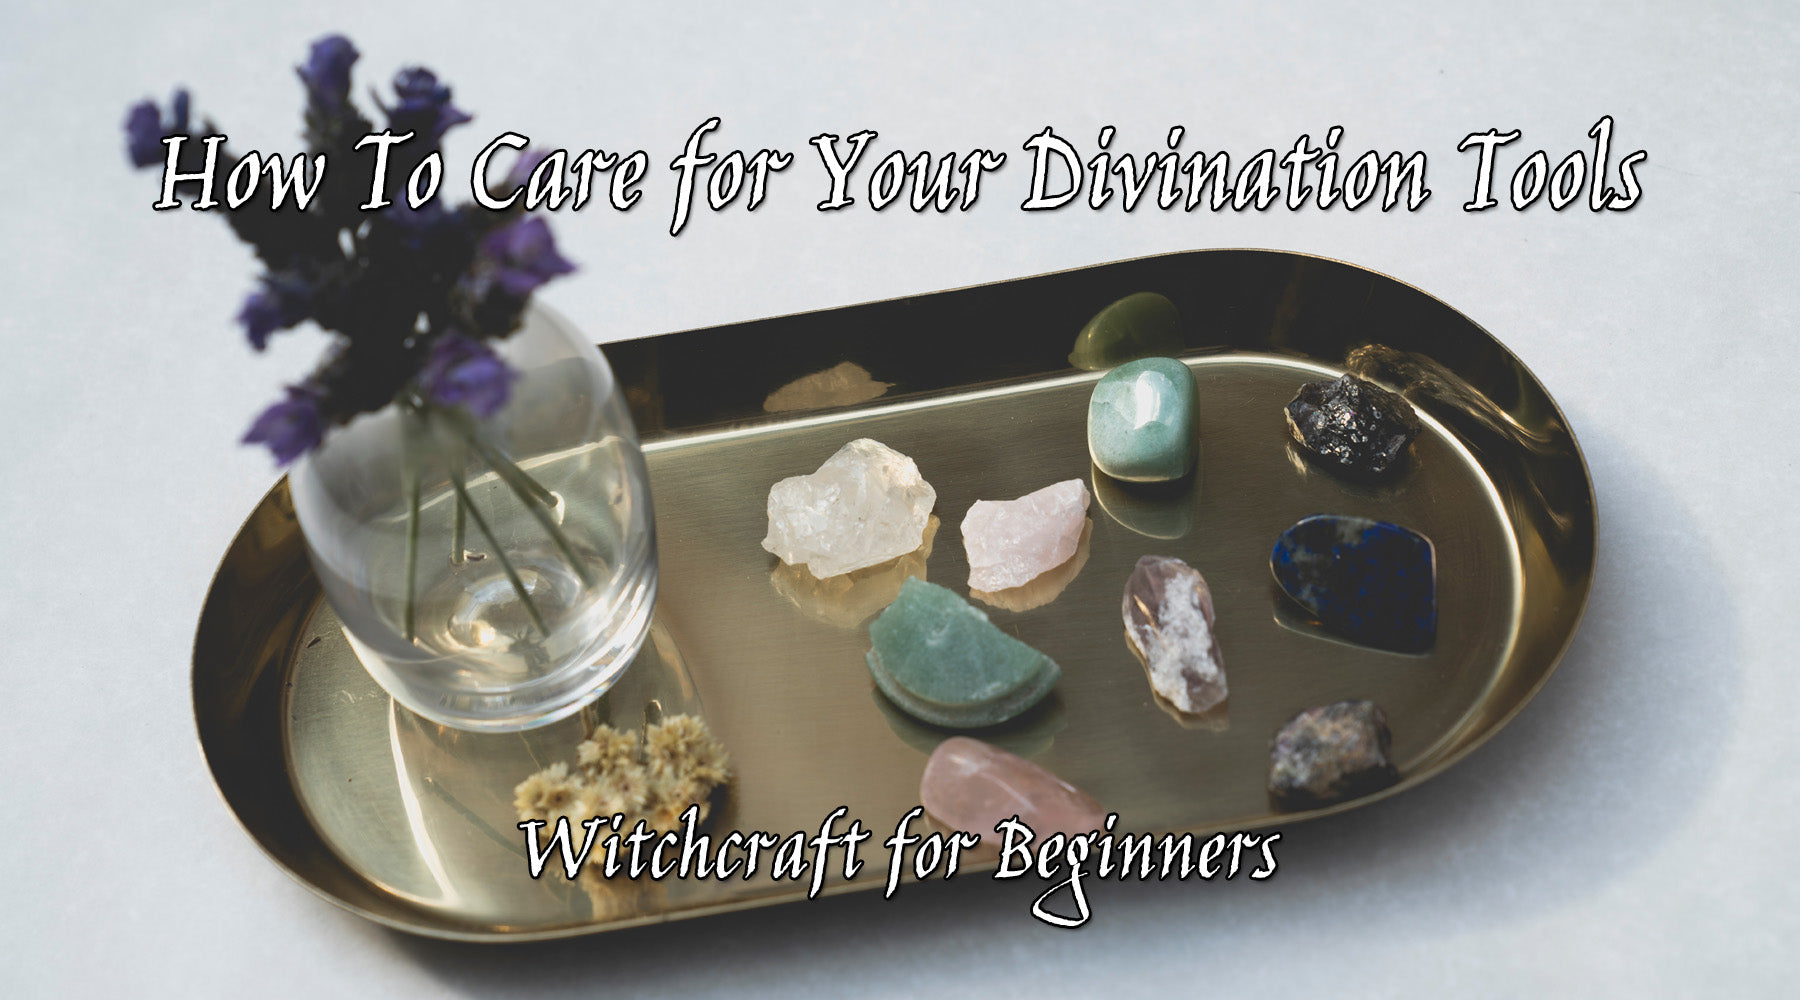 How To Care for Your Divination Tools